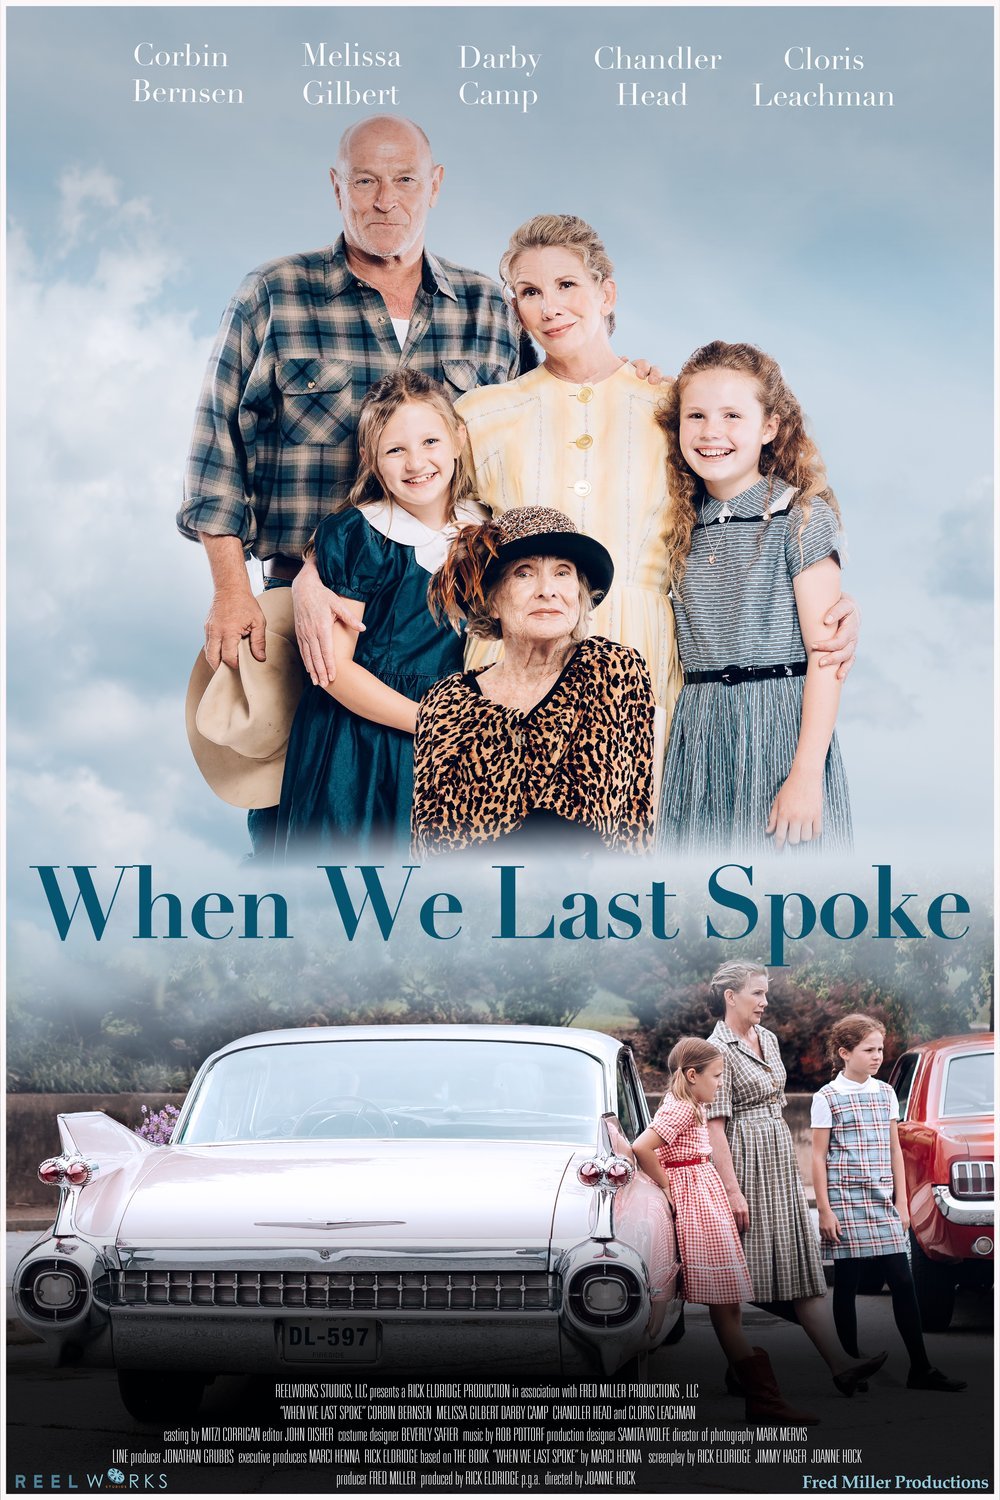 Poster of the movie When We Last Spoke